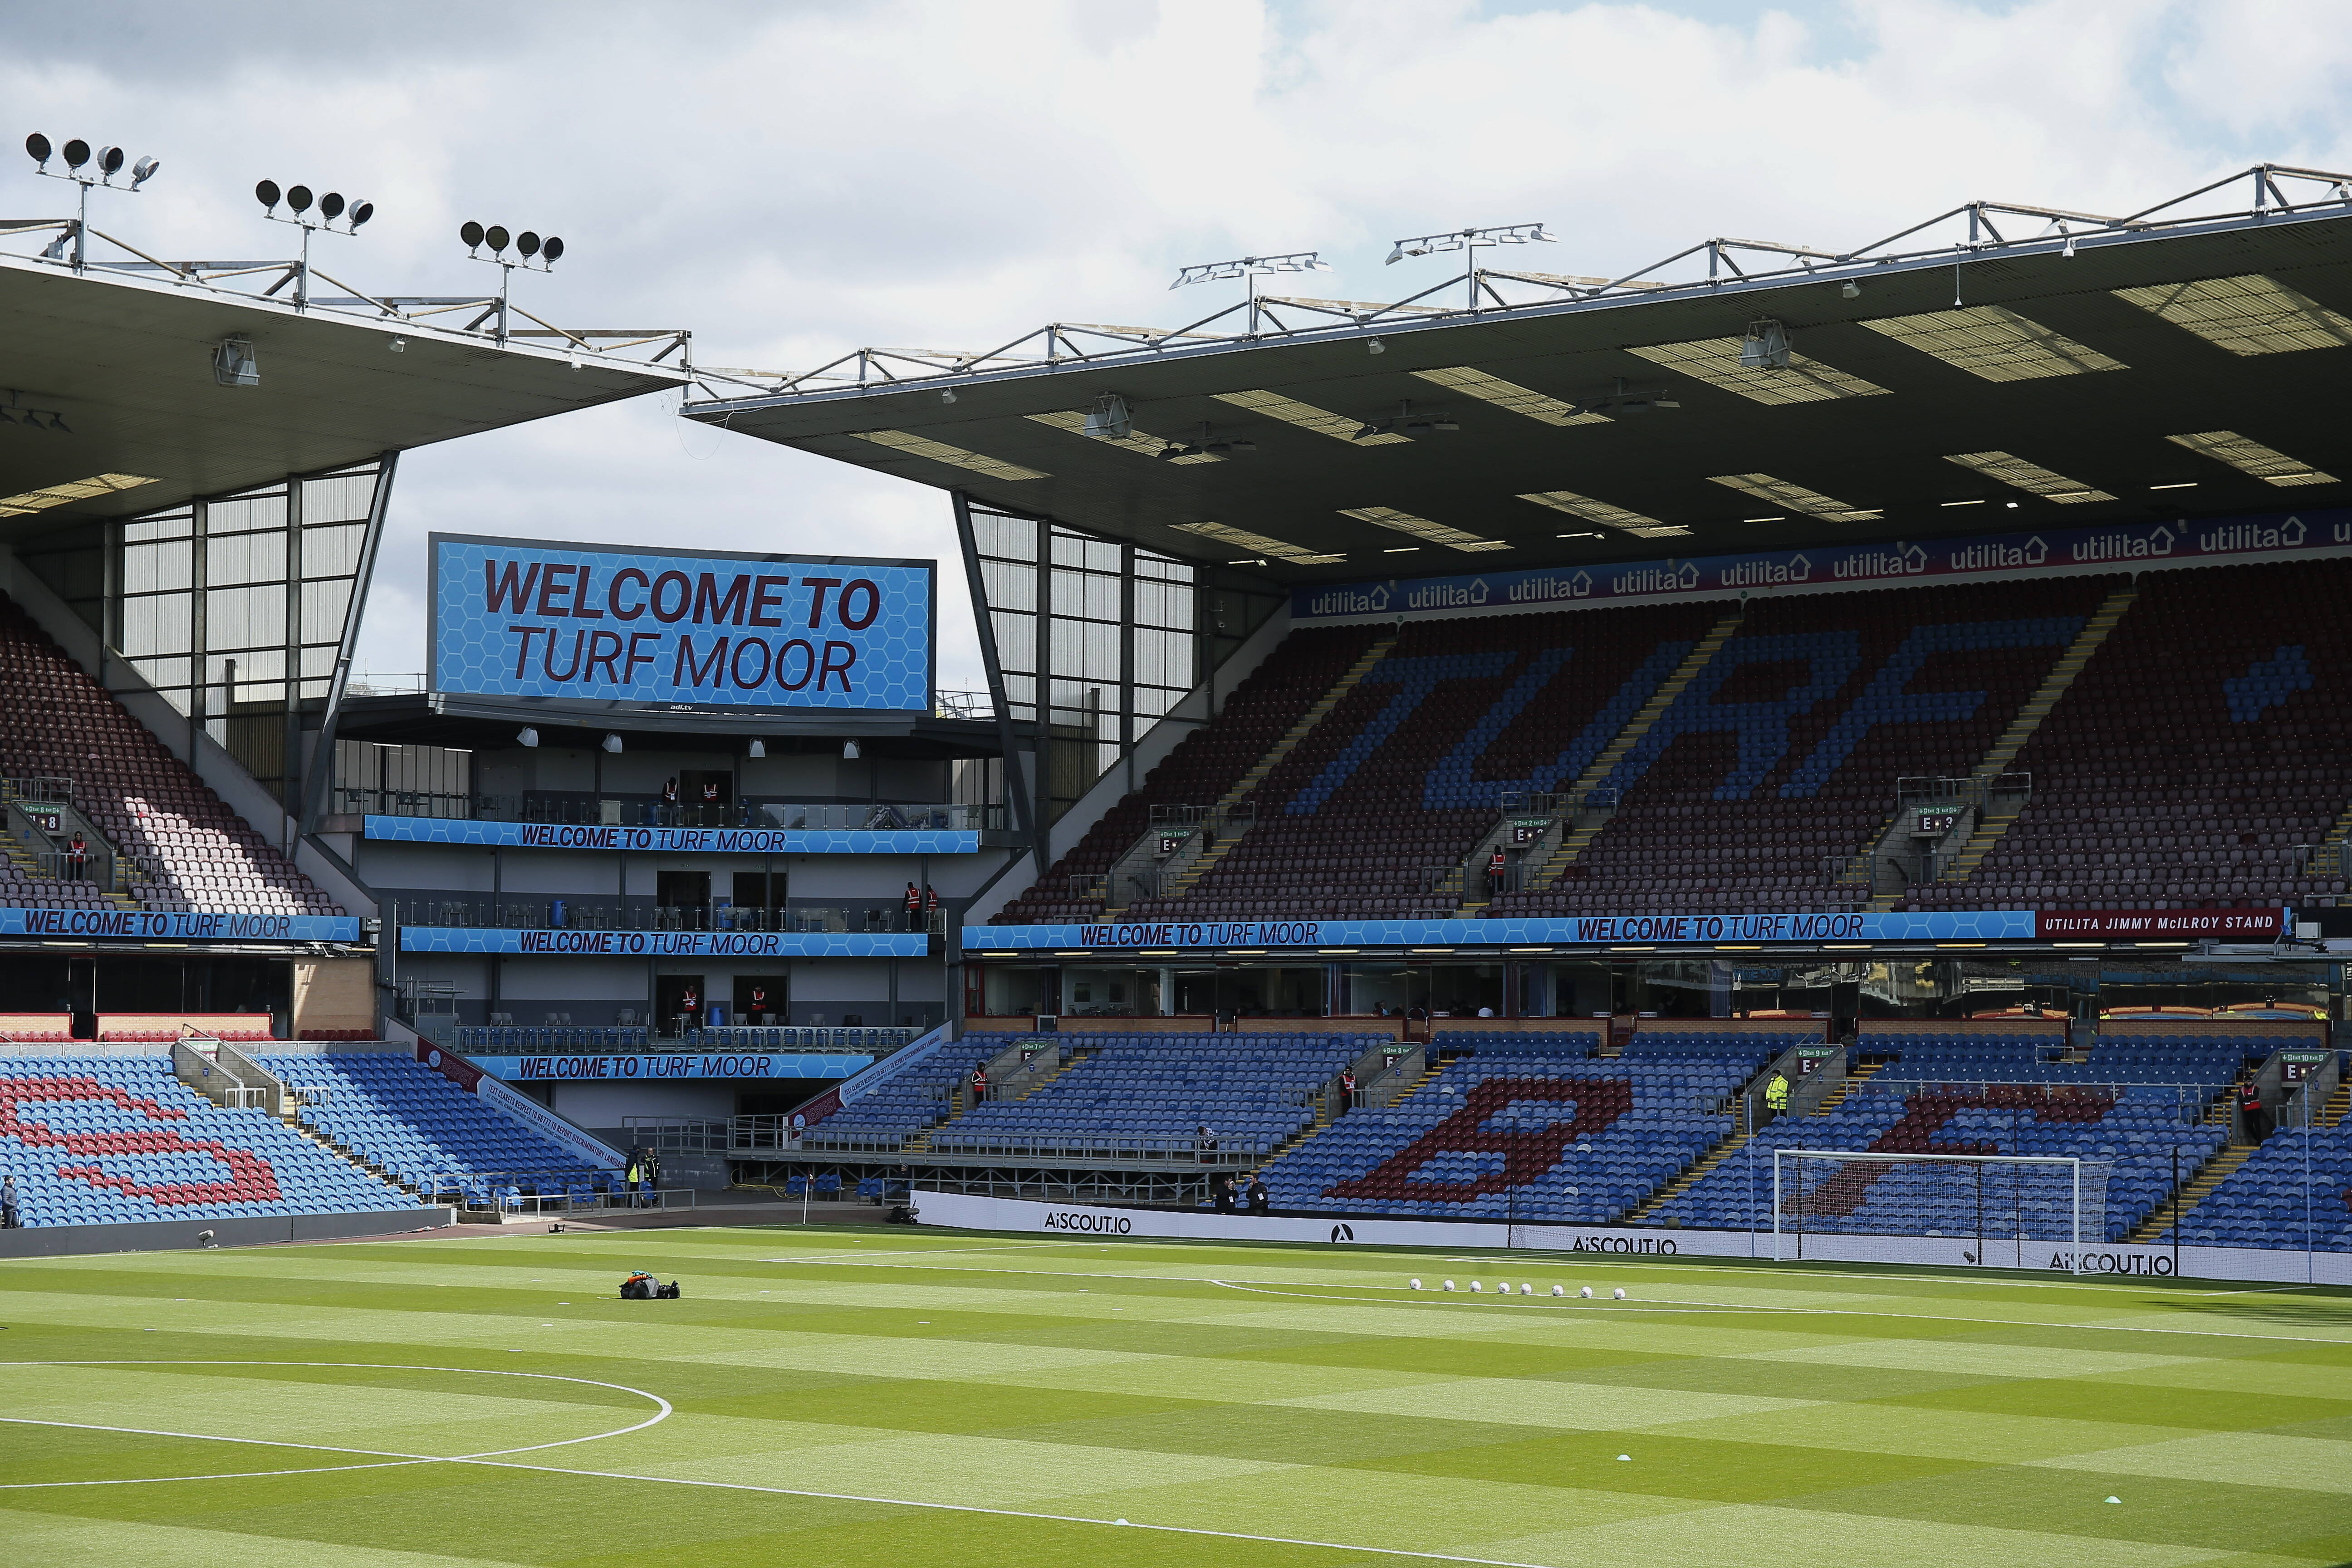 A general view of Turf Moor ahead of Burnley's Premier League game against Wolves in April 2022